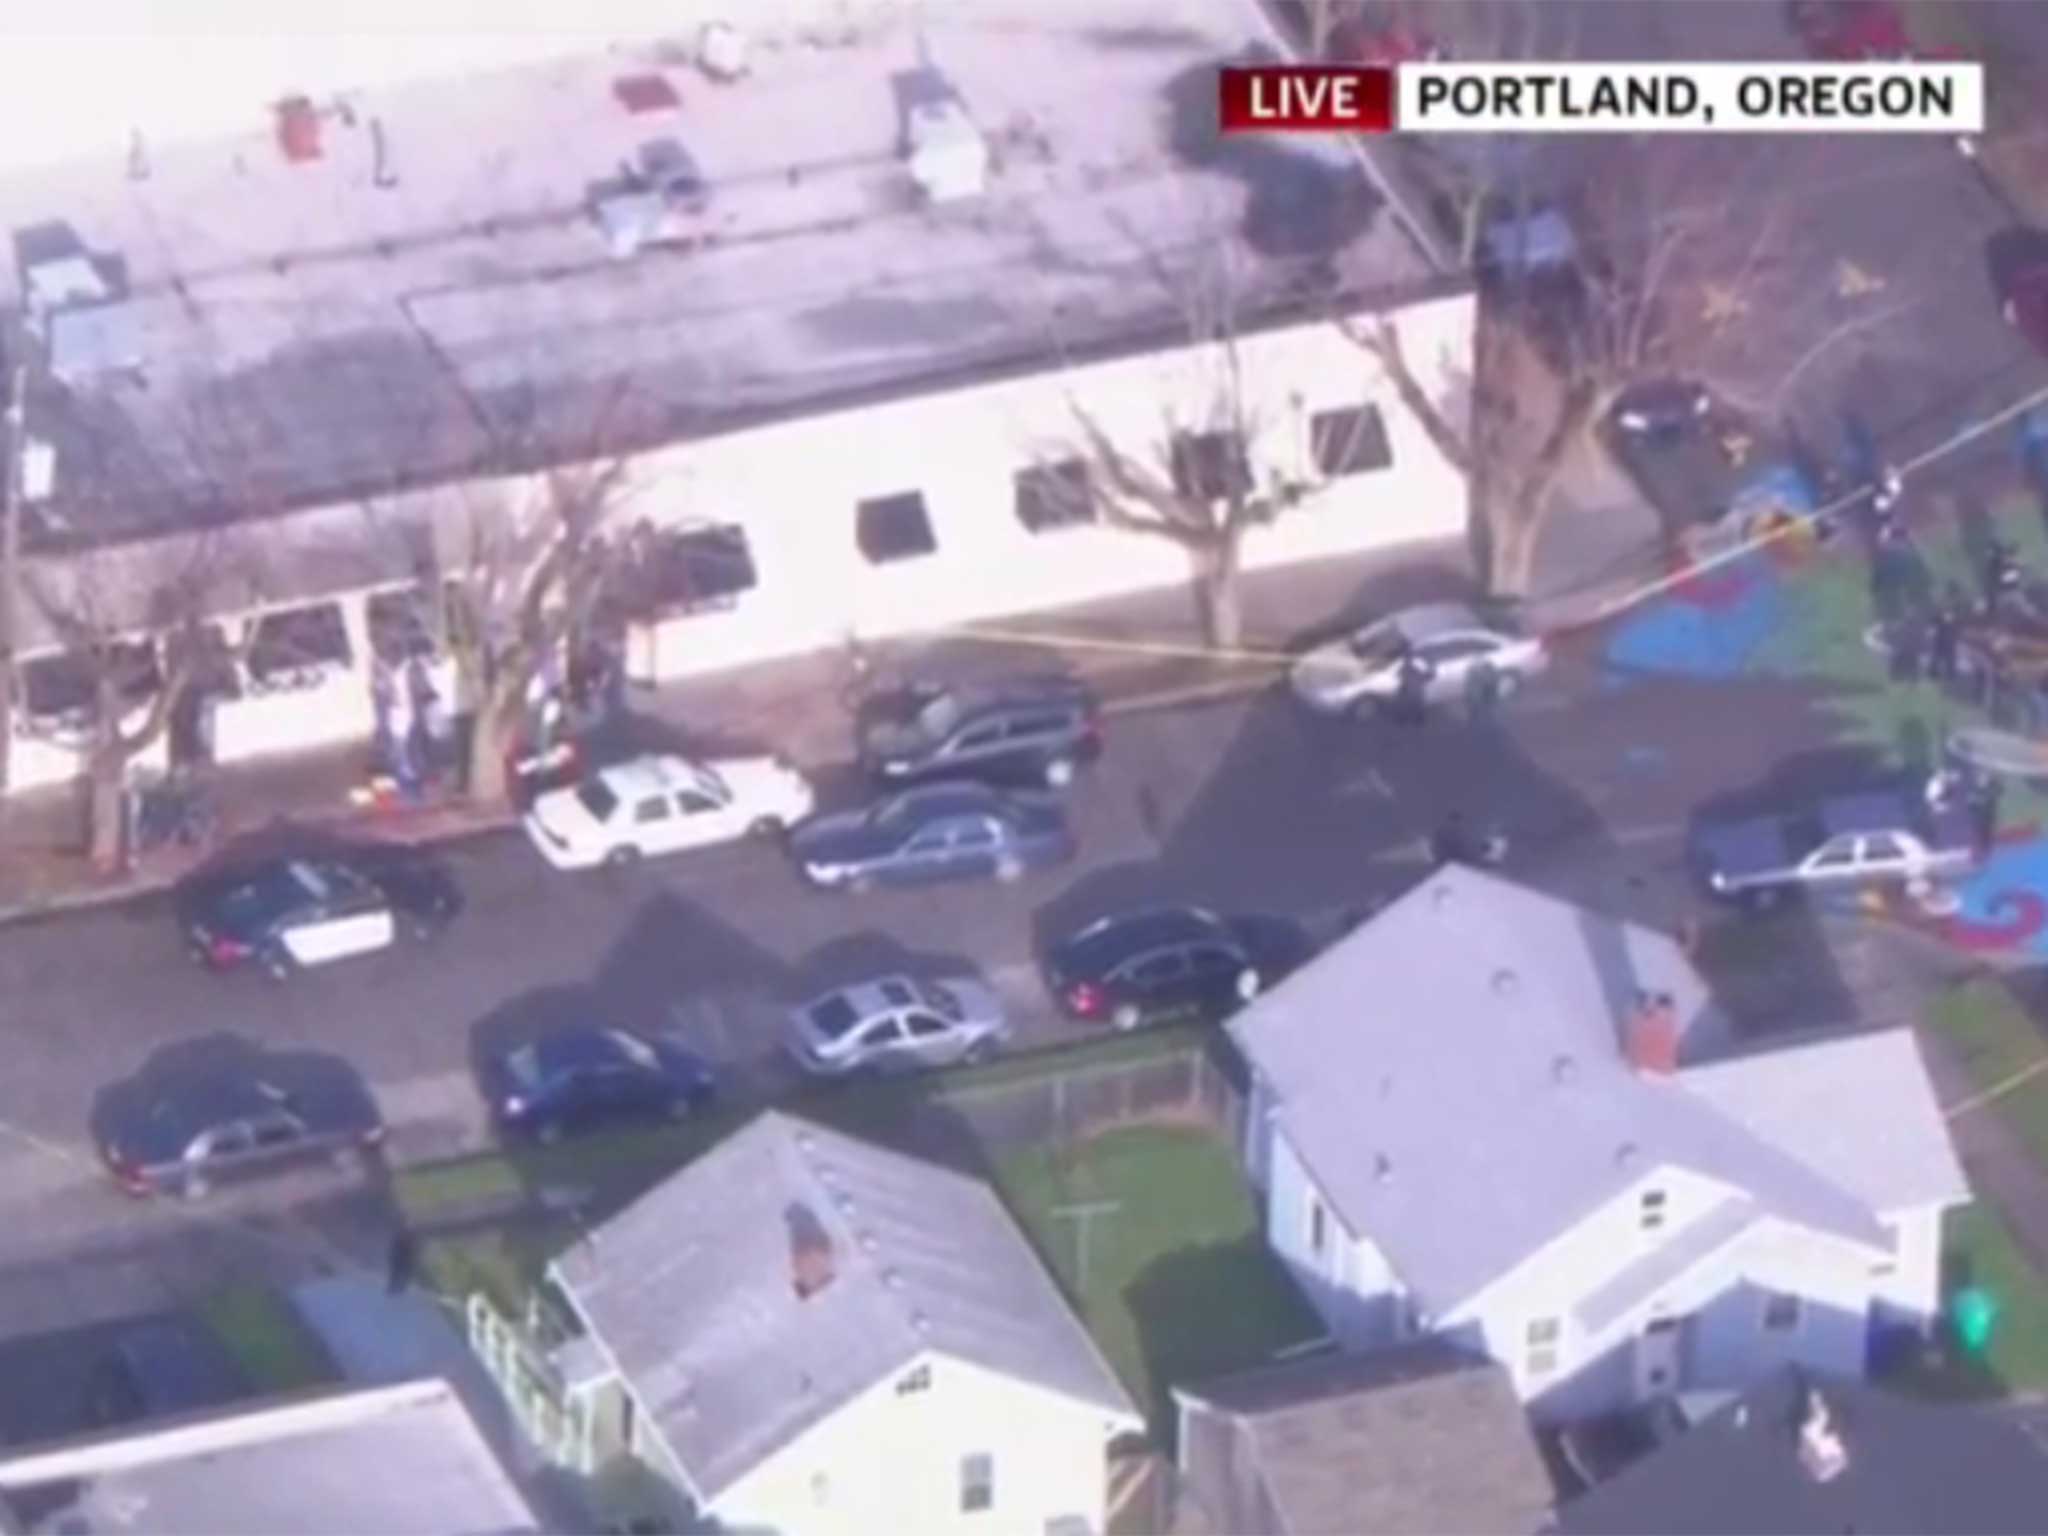 A screenshot from the Sky News coverage of the Oregon shooting